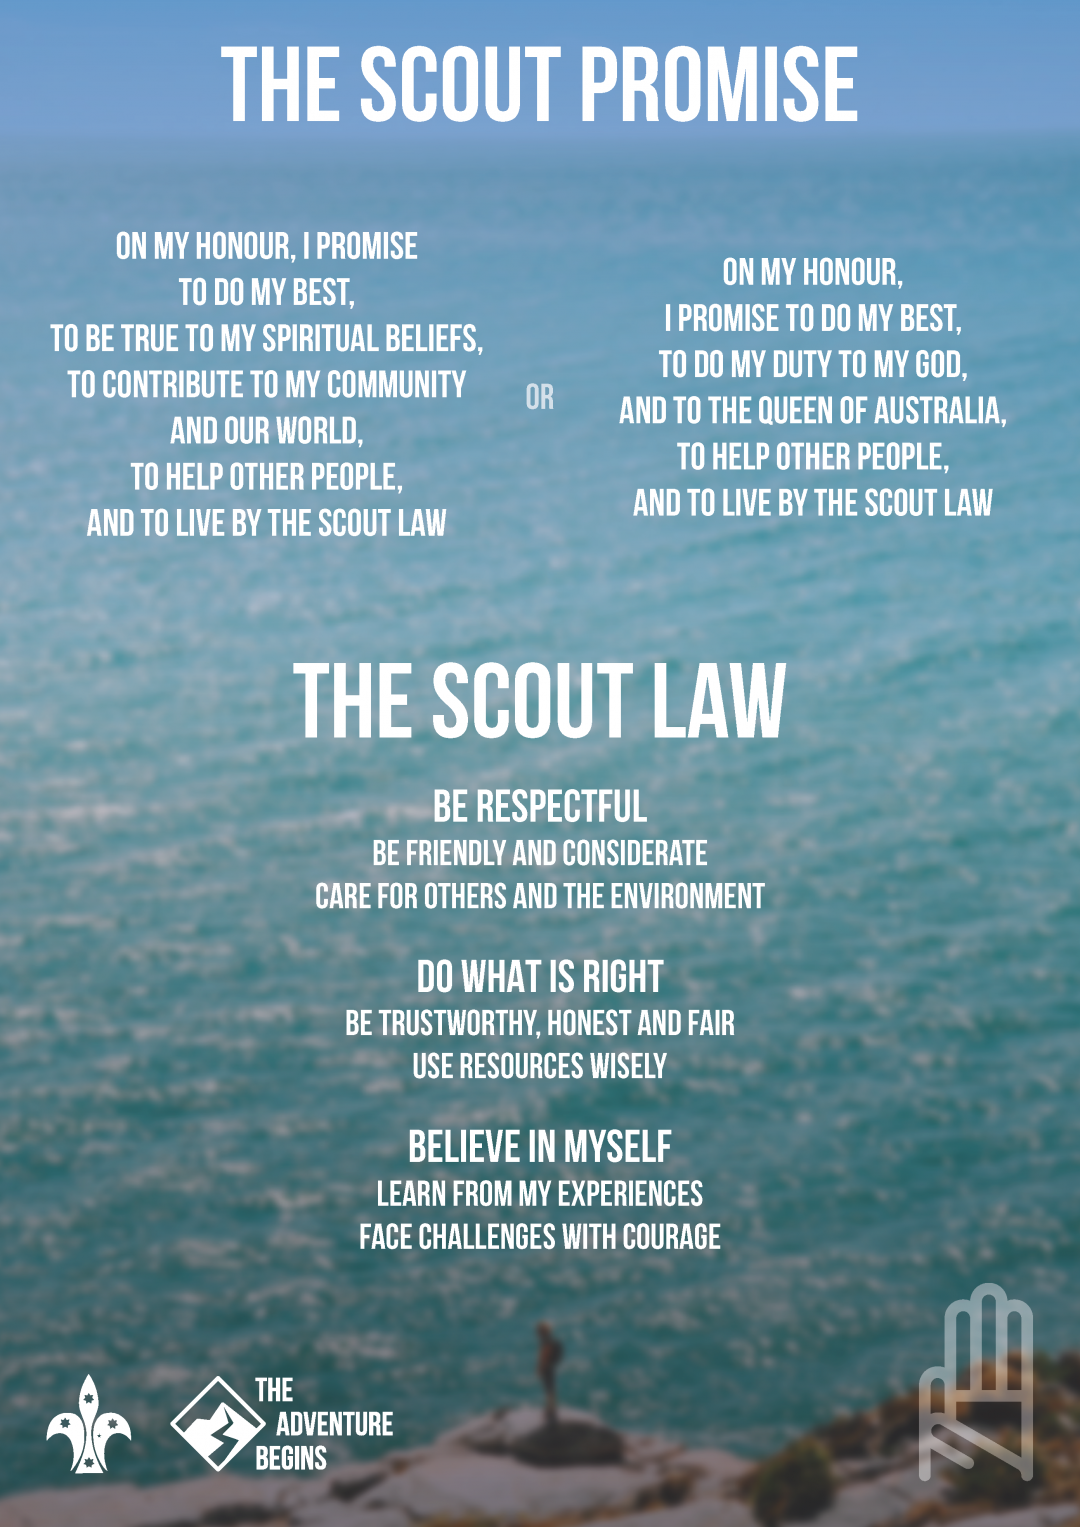 the-adventure-begins-promise-and-law-scouts-australia